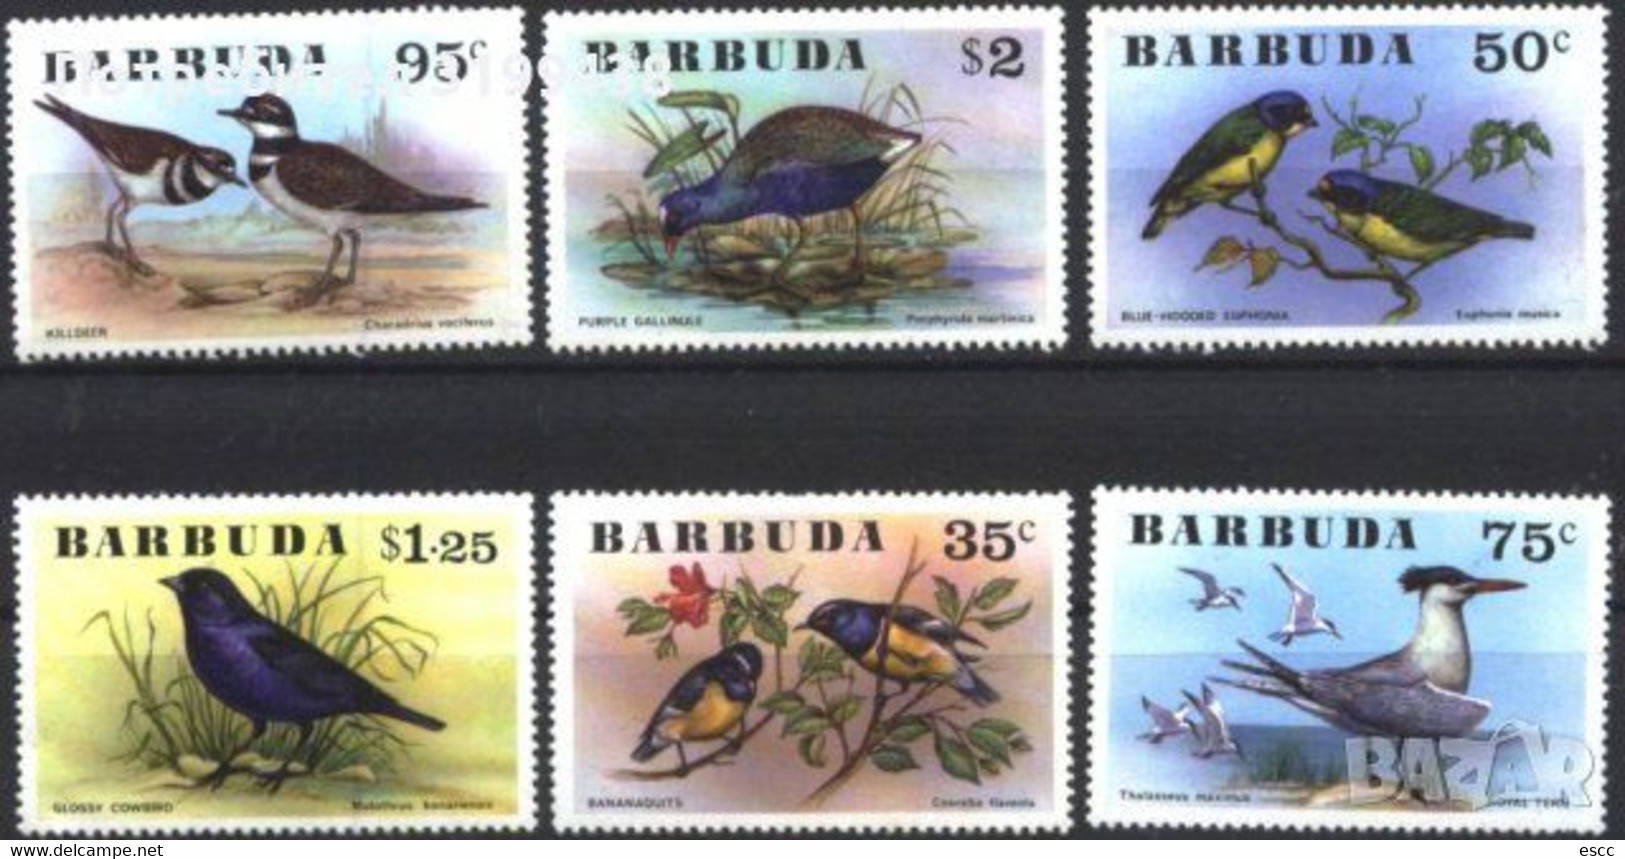 Mint Stamps Fauna Birds 1976 From Barbuda - Songbirds & Tree Dwellers